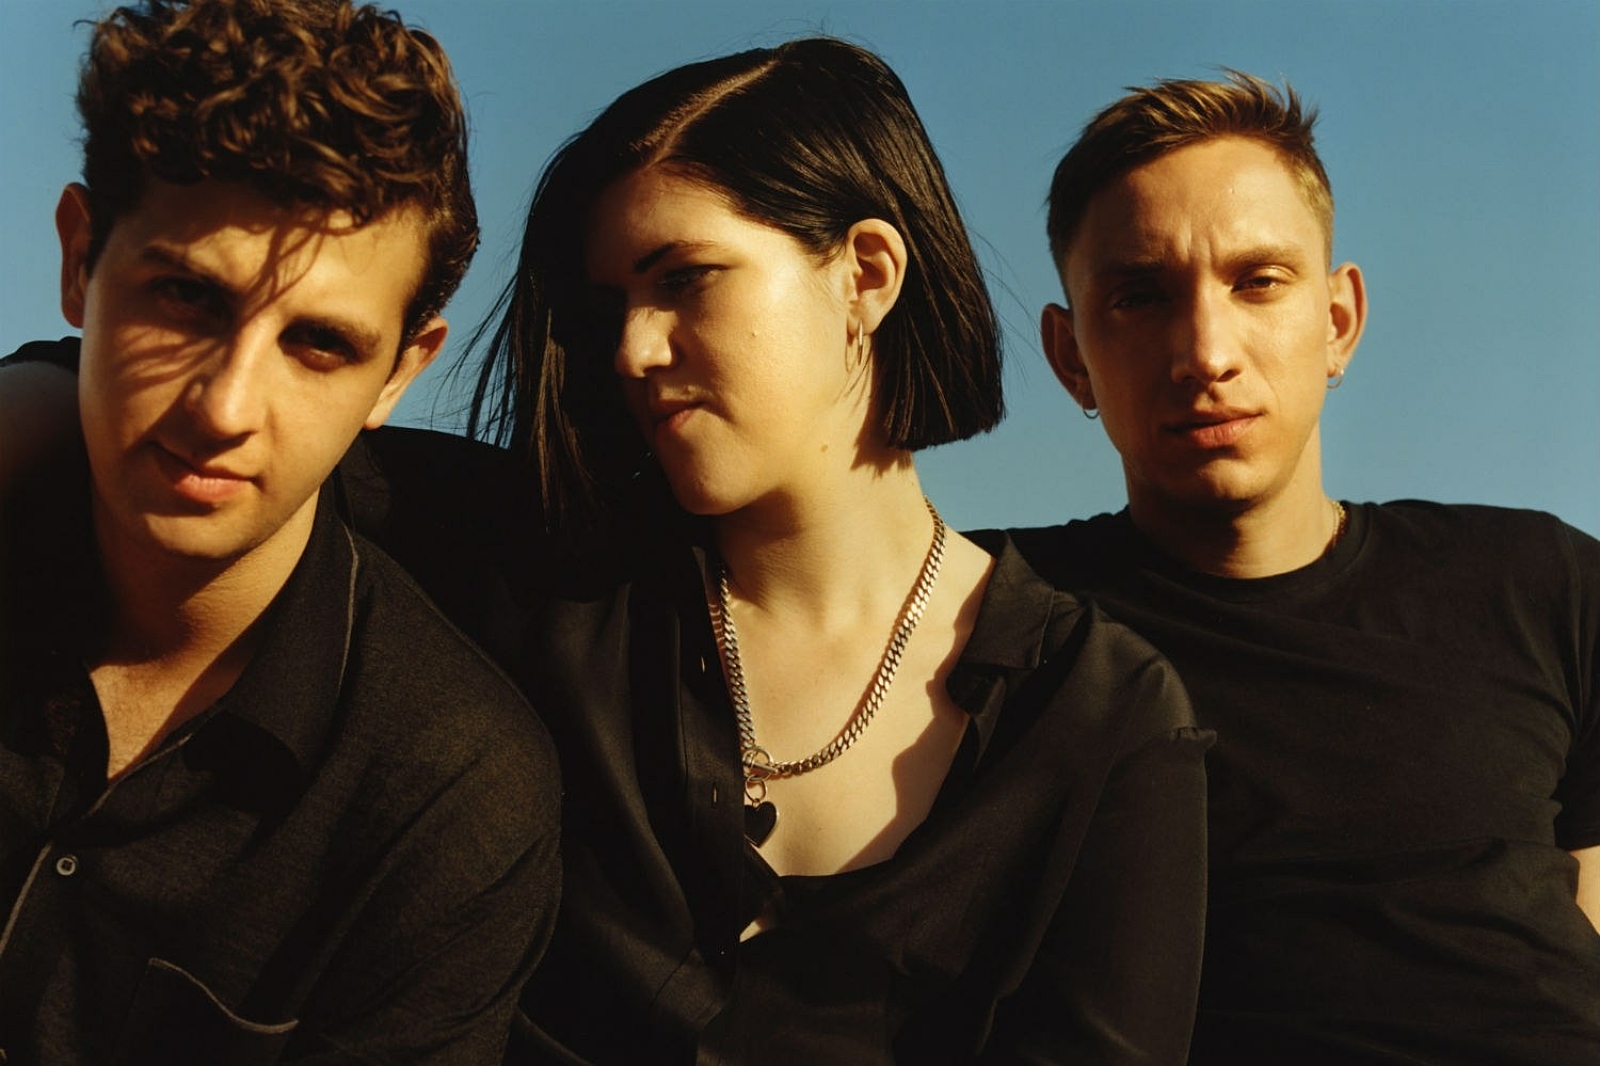 Oliver Sim hints at "more music from The xx"